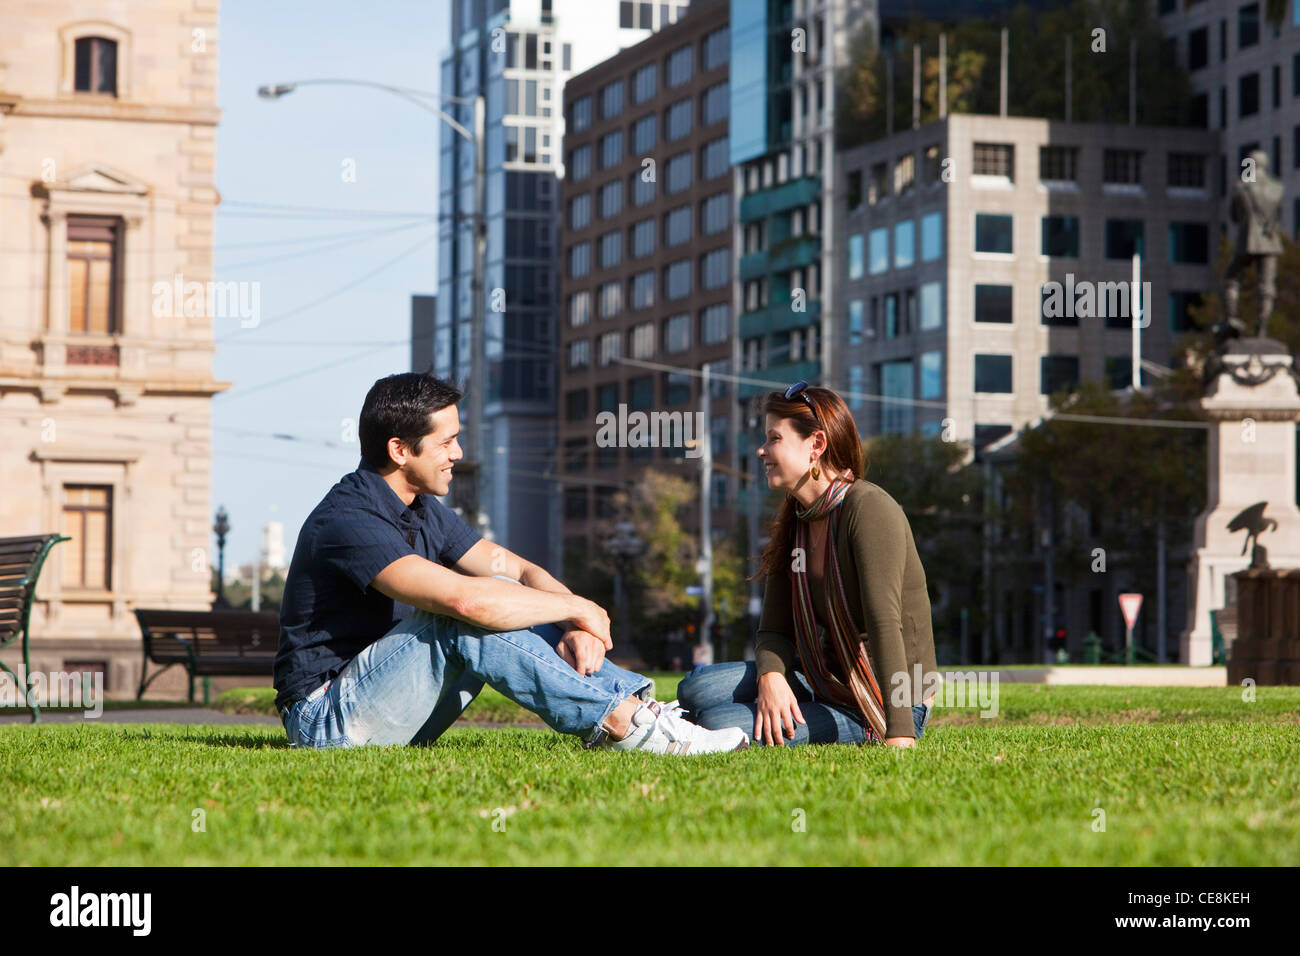 Young couple relaxing in park with city skyline in background. Gordon Reserve, Melbourne, Victoria, Australia Stock Photo